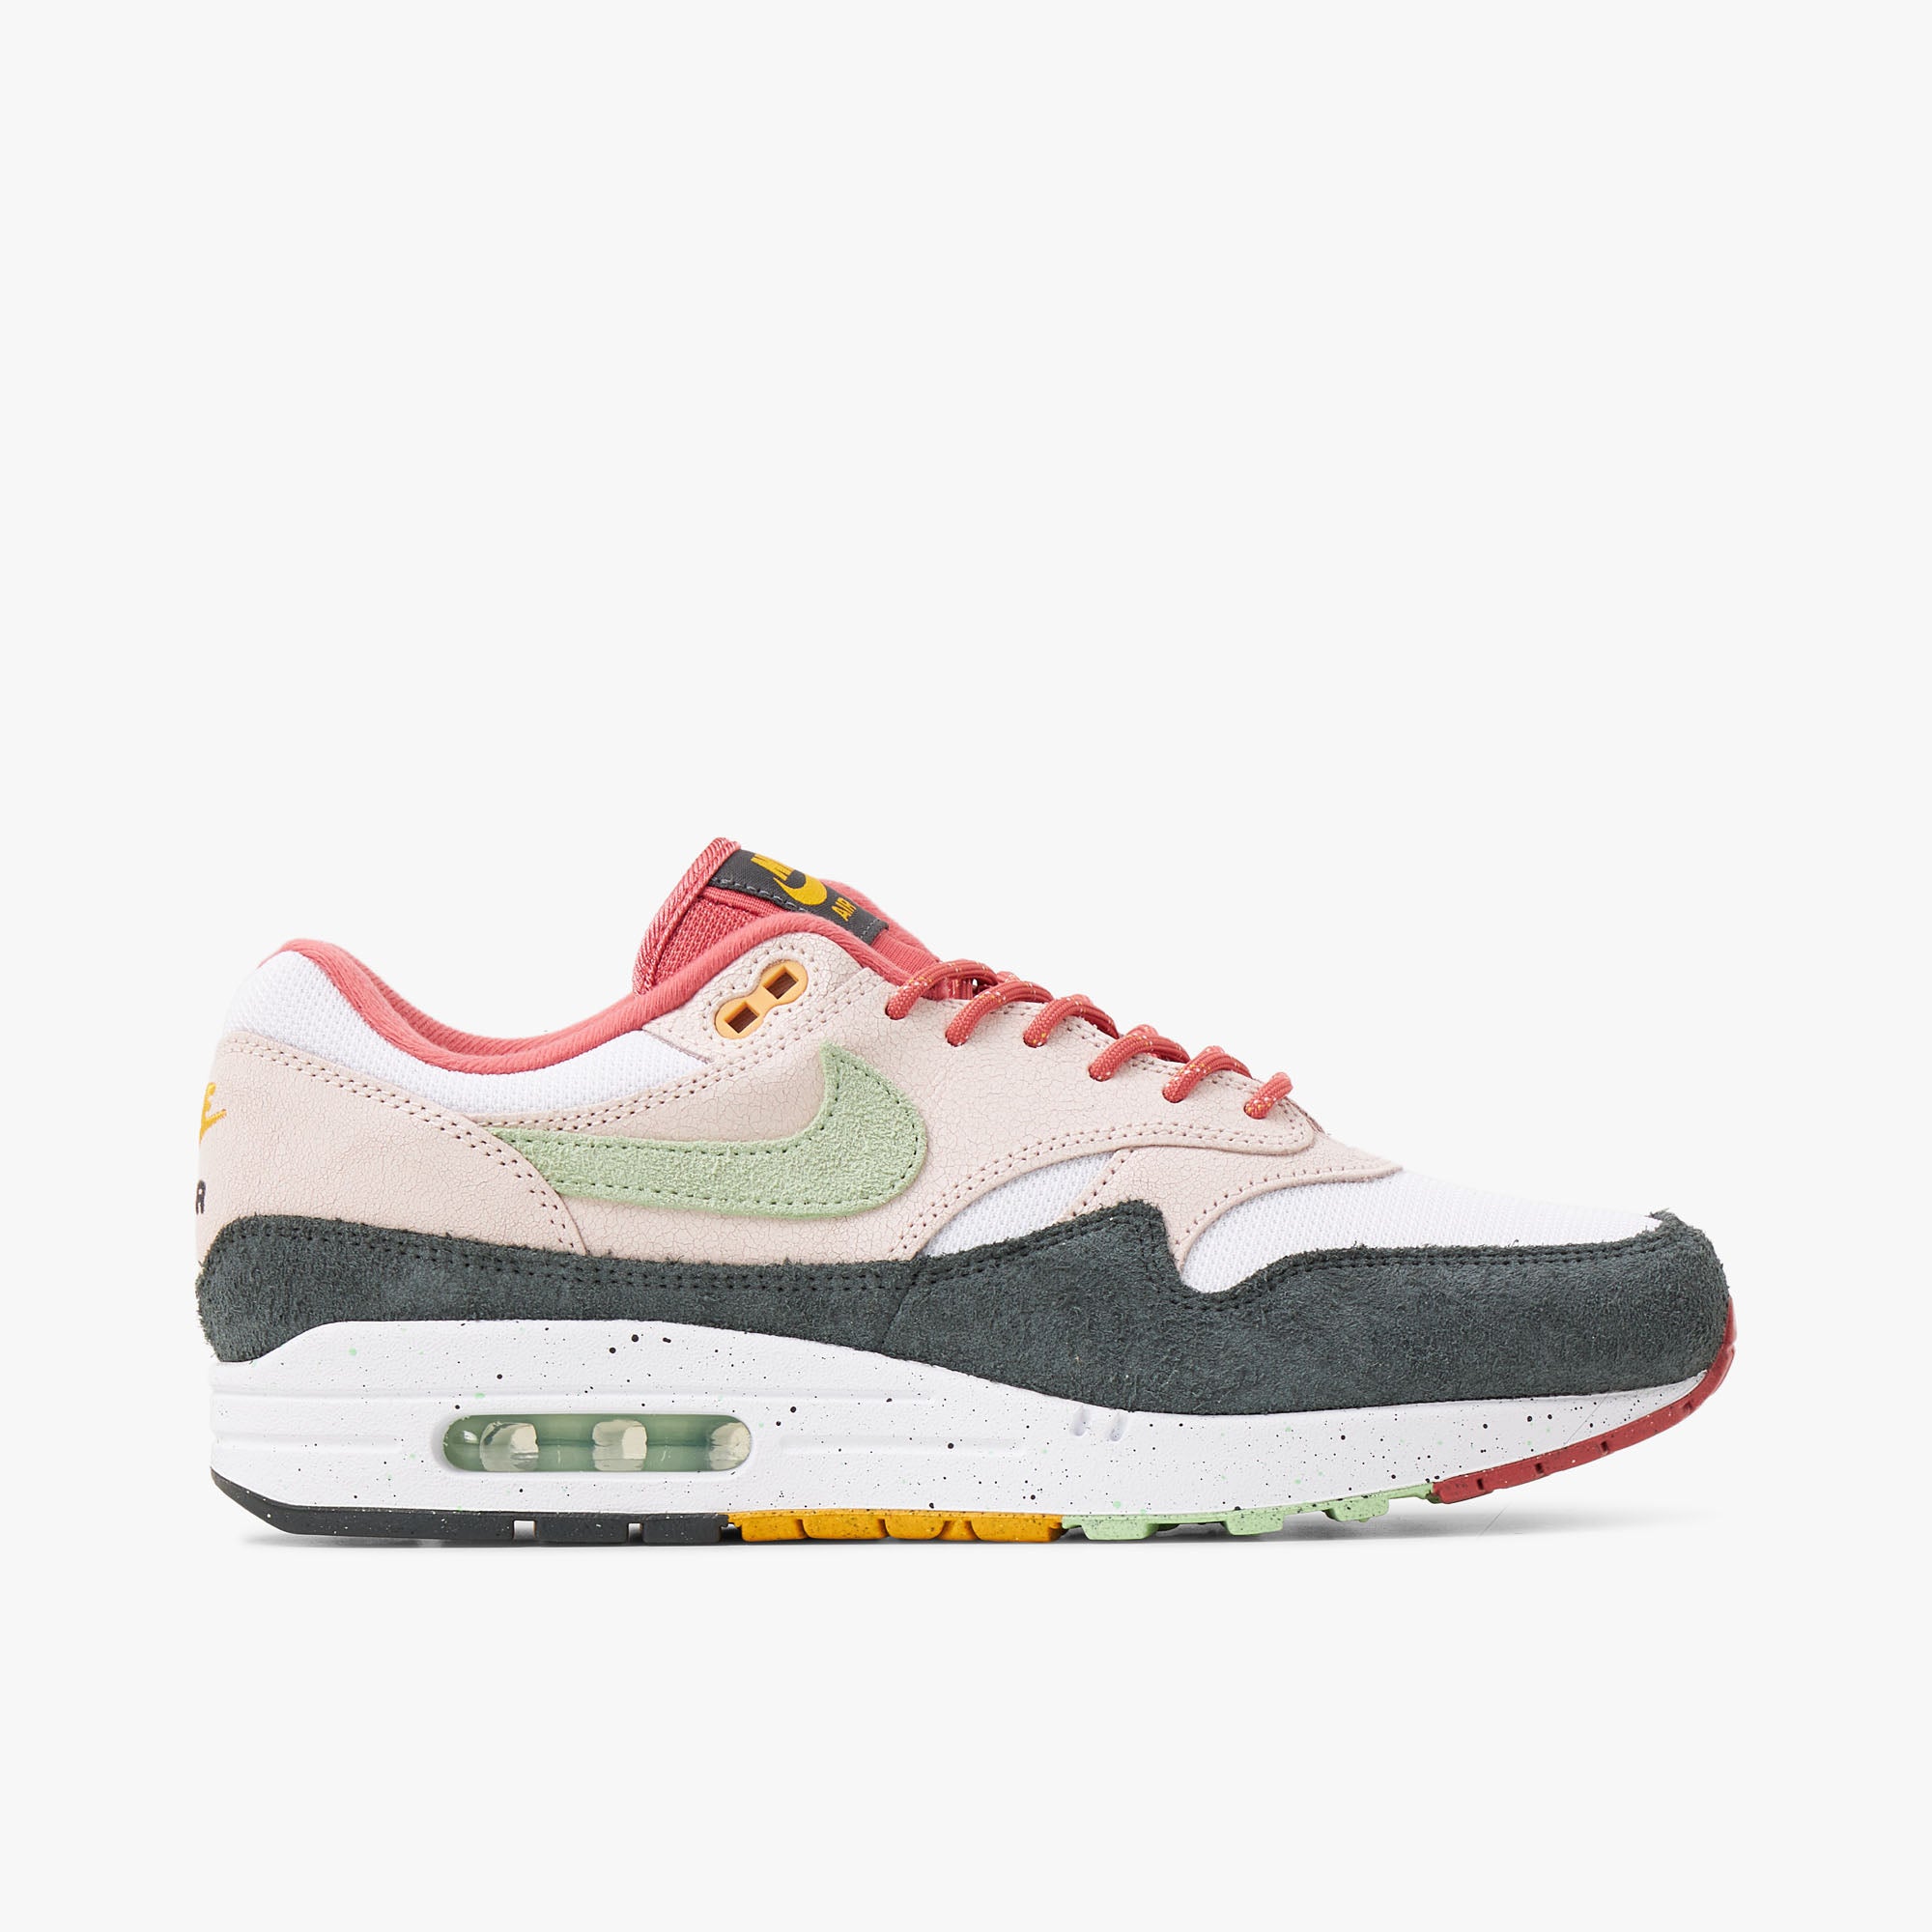 Nike Air Max 1 Light Soft Pink / Vapor Green - Anthracite - Low Top  1